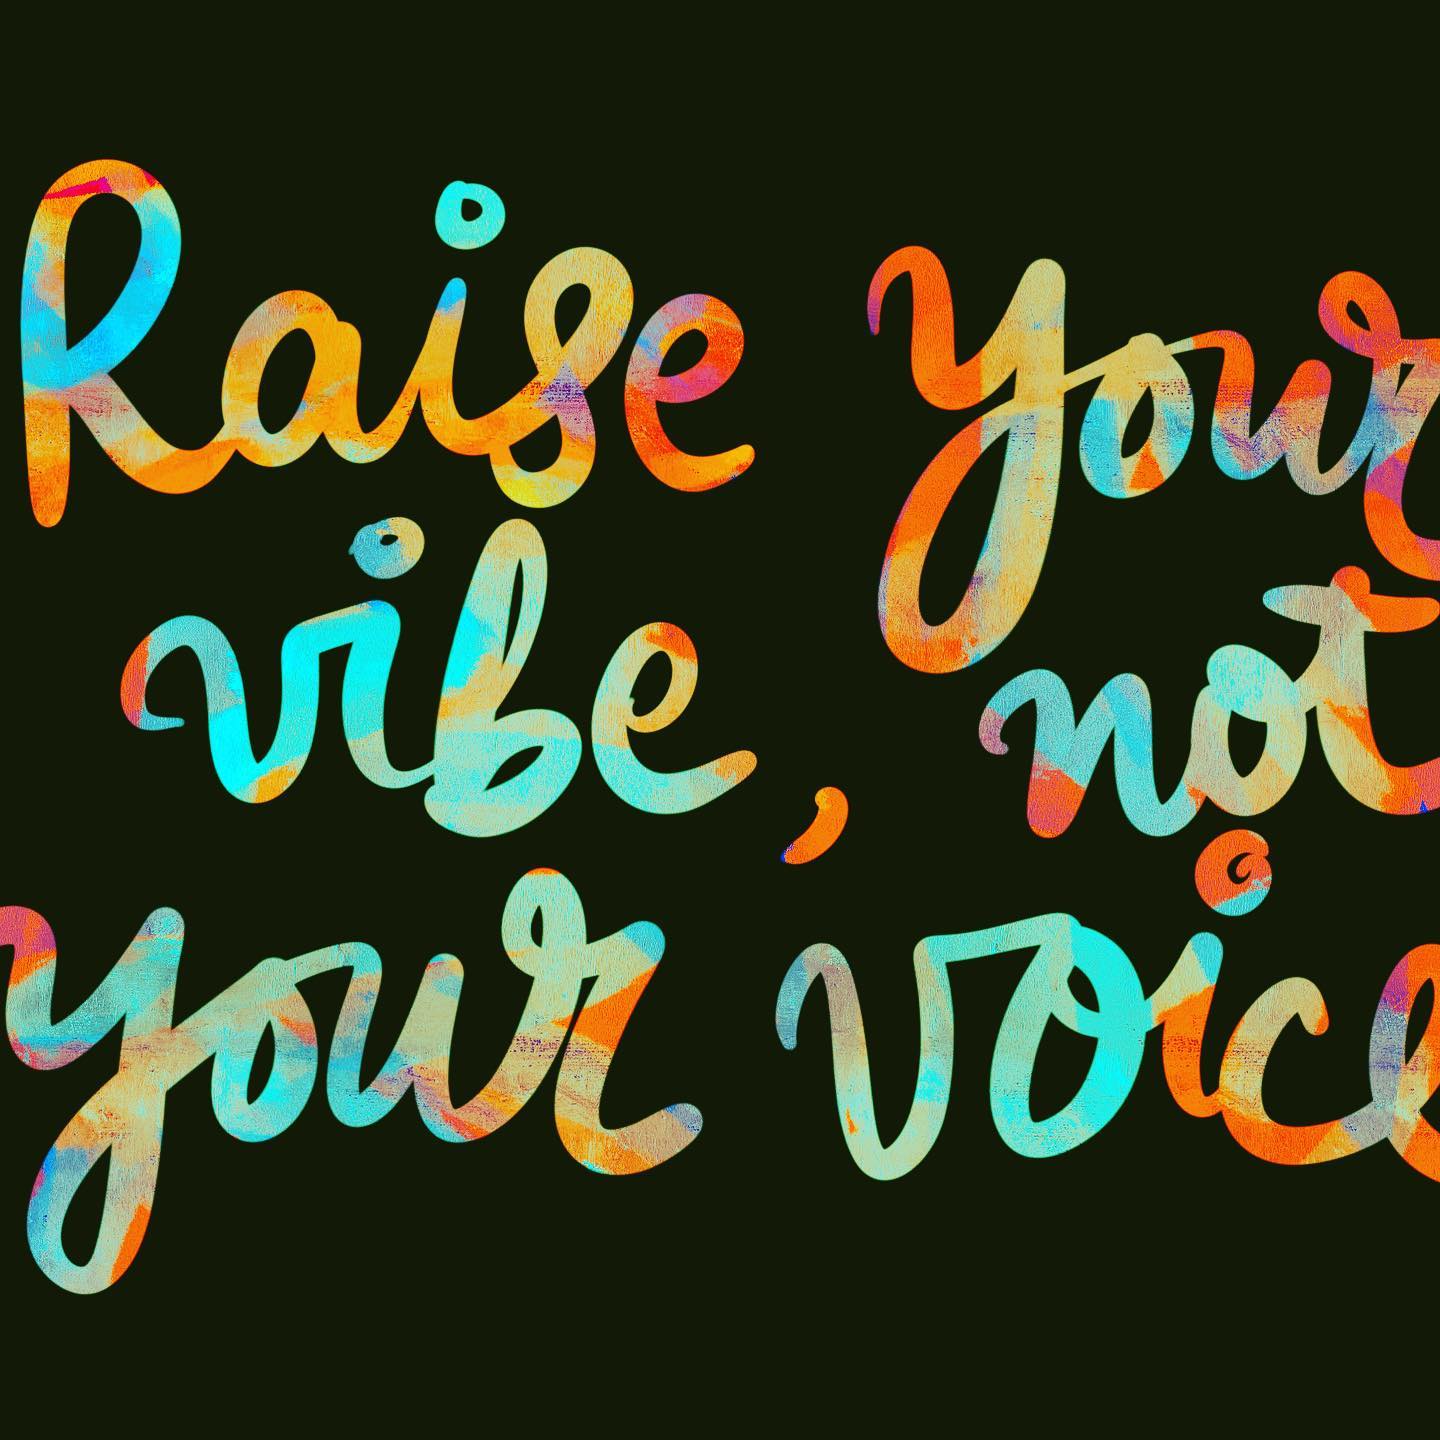 Raise your vibe, not your voice, for positivity, is a choice.

Let your thoughts be your guide to beckon it on your side.

It takes work, and often lots. Count your blessings, and align the dots.